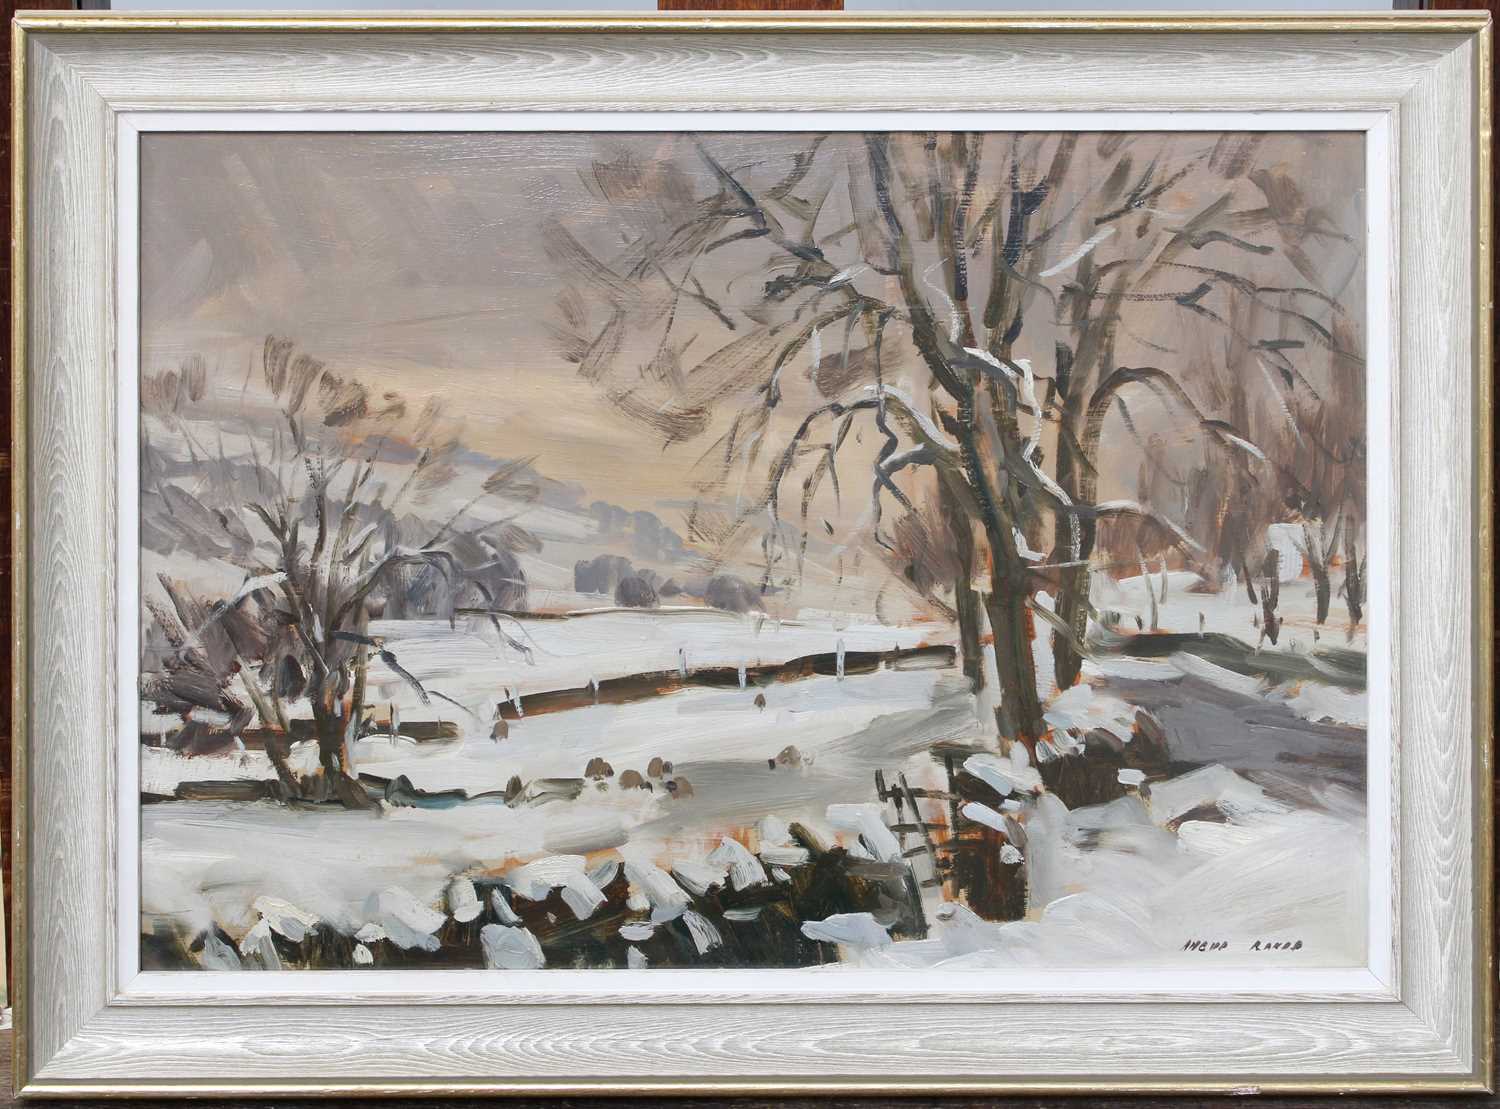 Angus Rands (1922-1985) "January Lansdcape nr Kettewell" Signed, inscribed to artist's label - Image 2 of 2